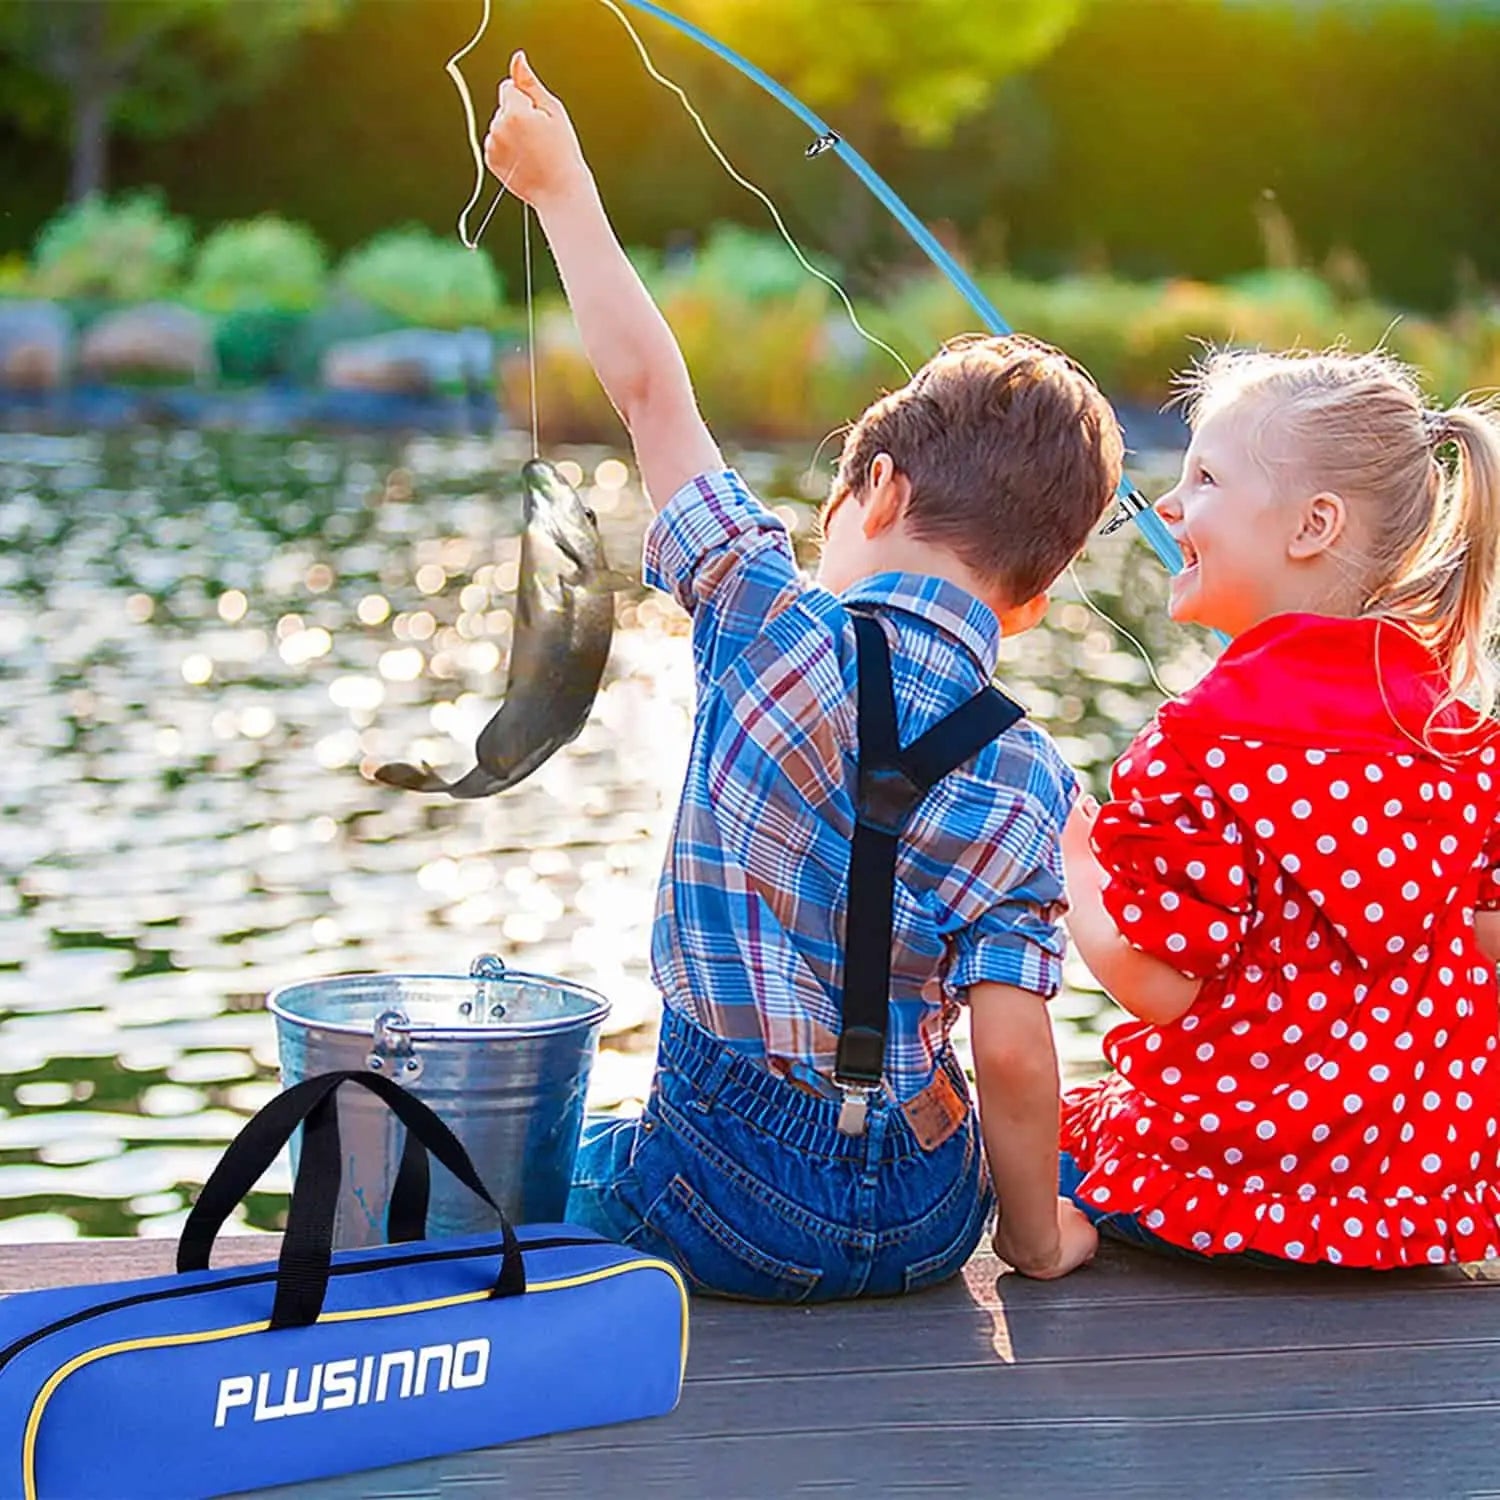 Only Reel ANd Tackle Box)PLUSINNO Kids Fishing Pole, Portable Telescopic  Fishing Rod and Reel Combo Kit, Sports Equipment, Fishing on Carousell